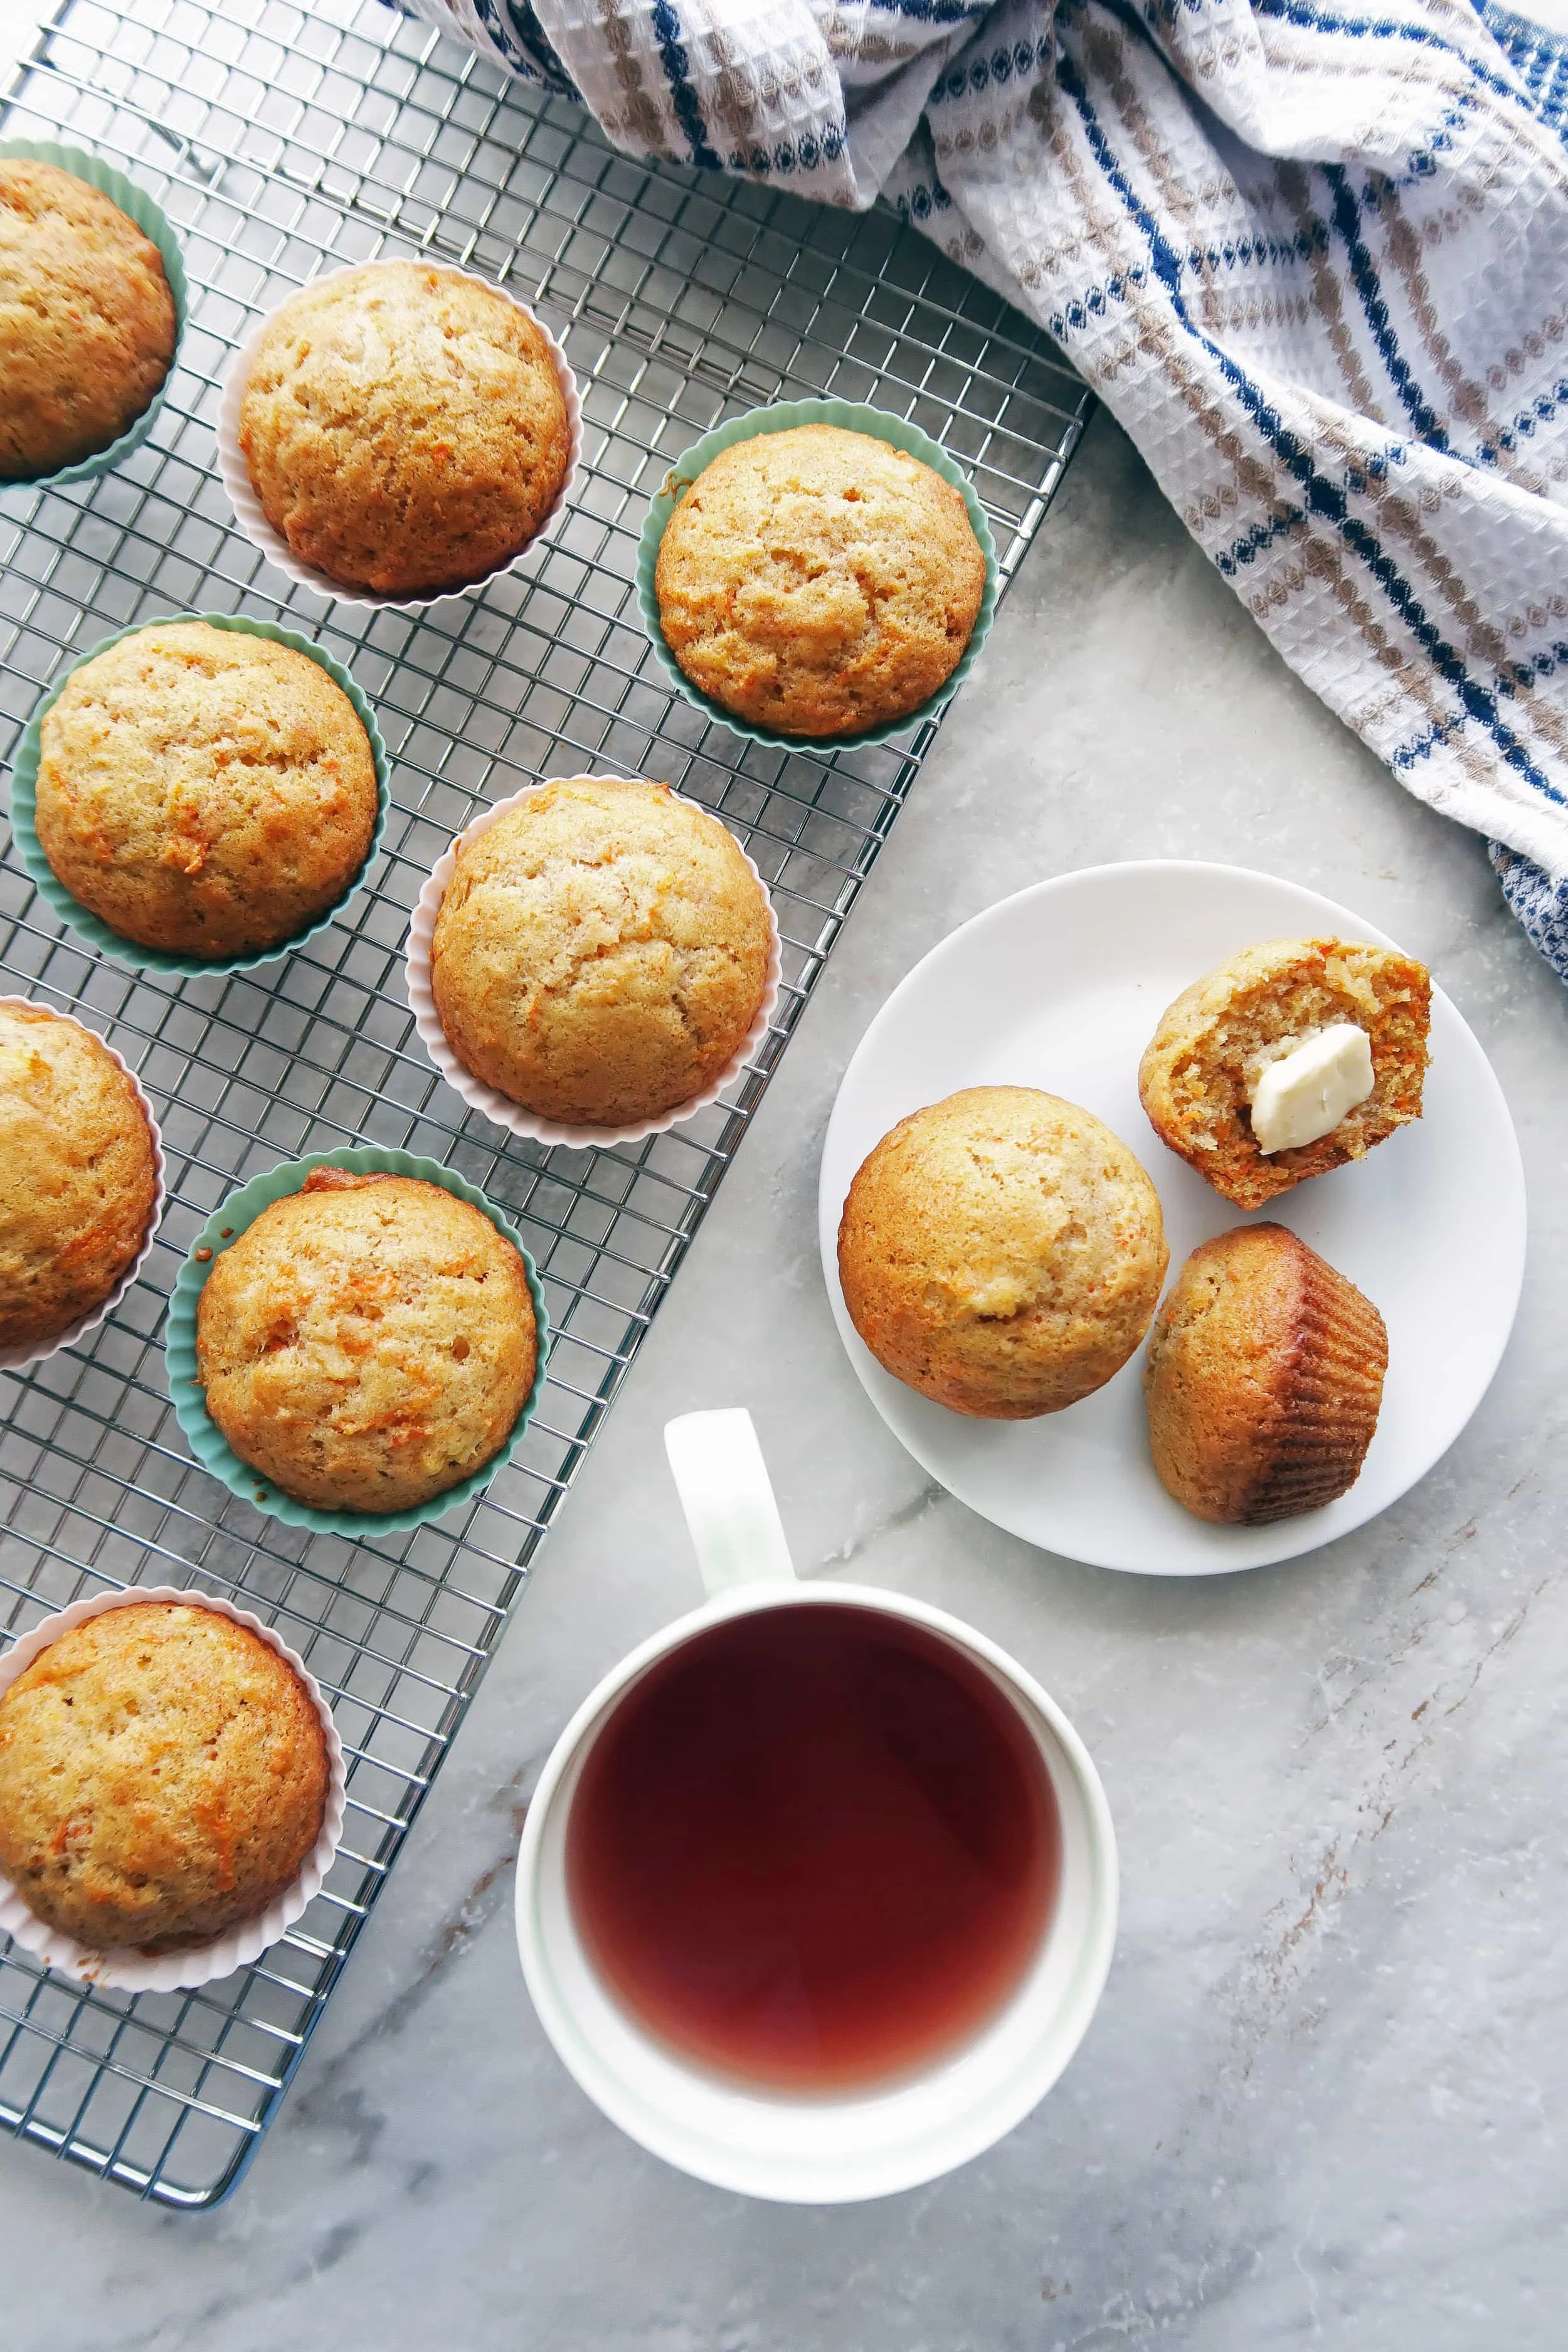 Overhead view of two carrot Pineapple Muffins on small white plate, muffins on a cooling rack, and a cup of tea.